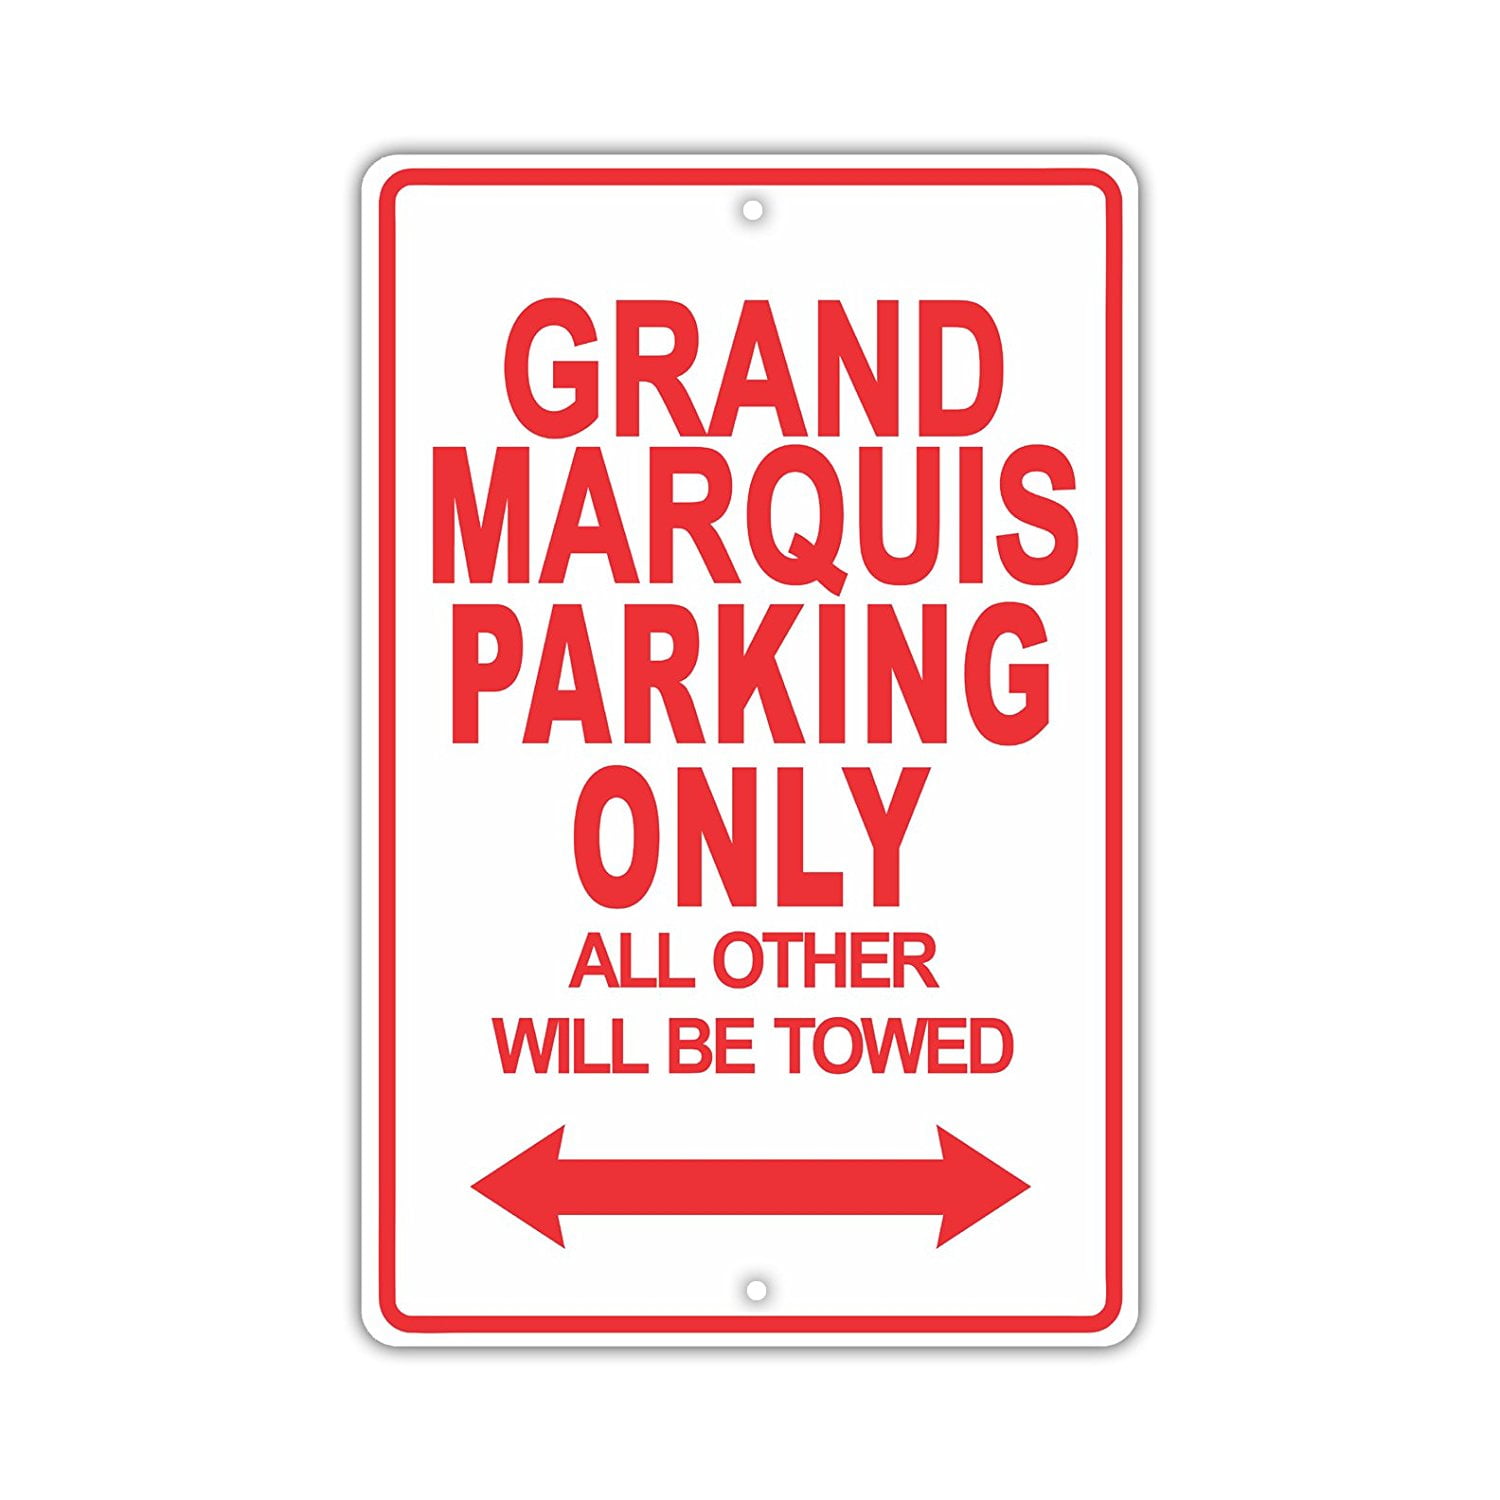 Grand Marquis Parking Only All Towed Man Cave Novelty Garage Aluminum Metal Sign 